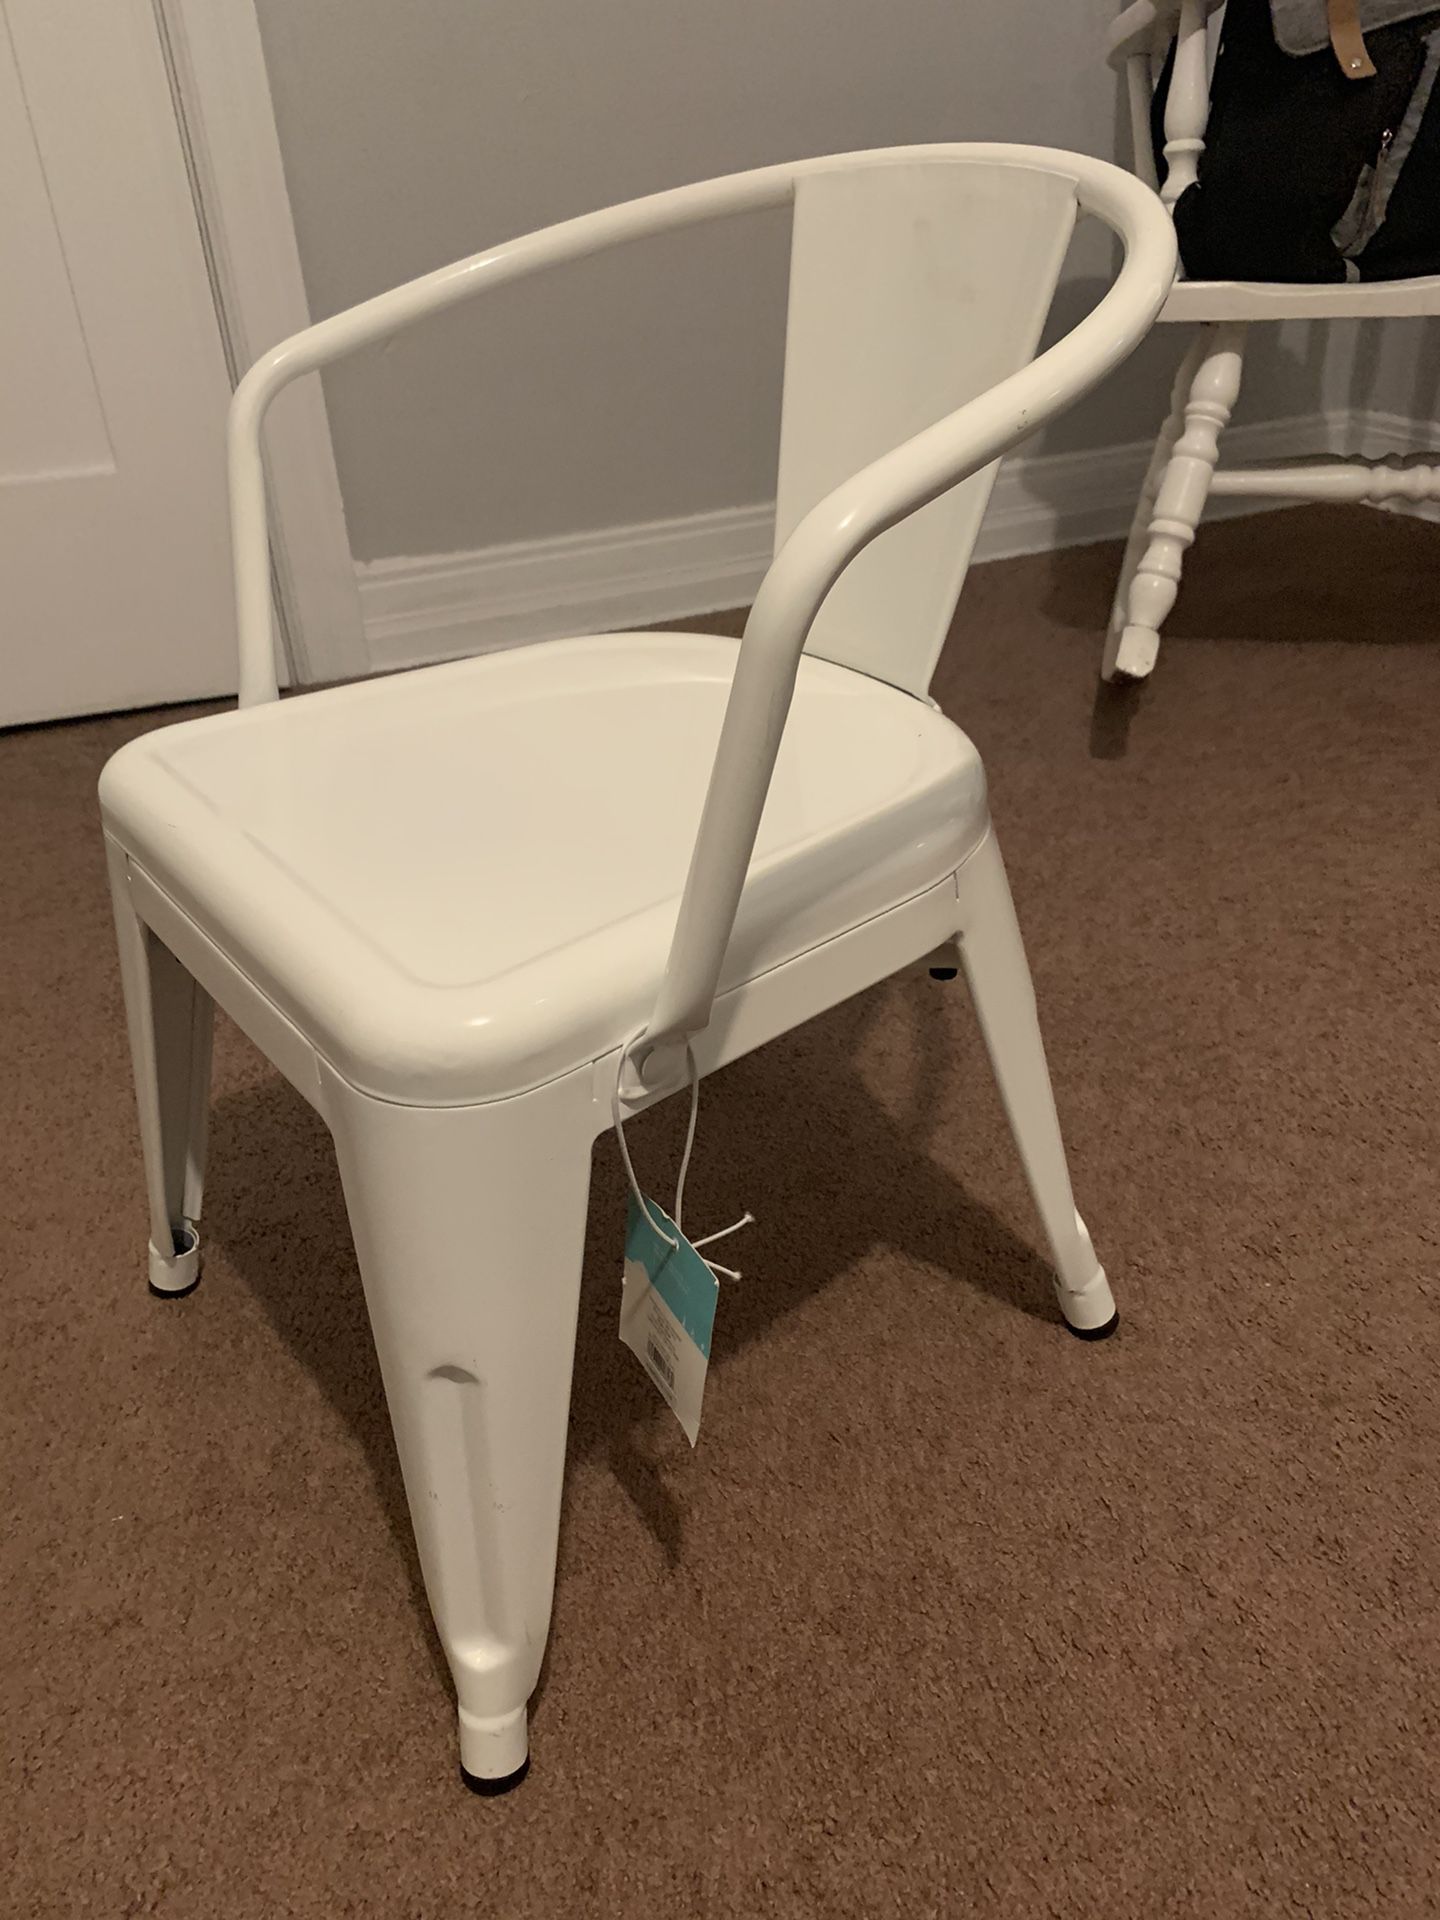 Pillow fort industrial activity chair in white